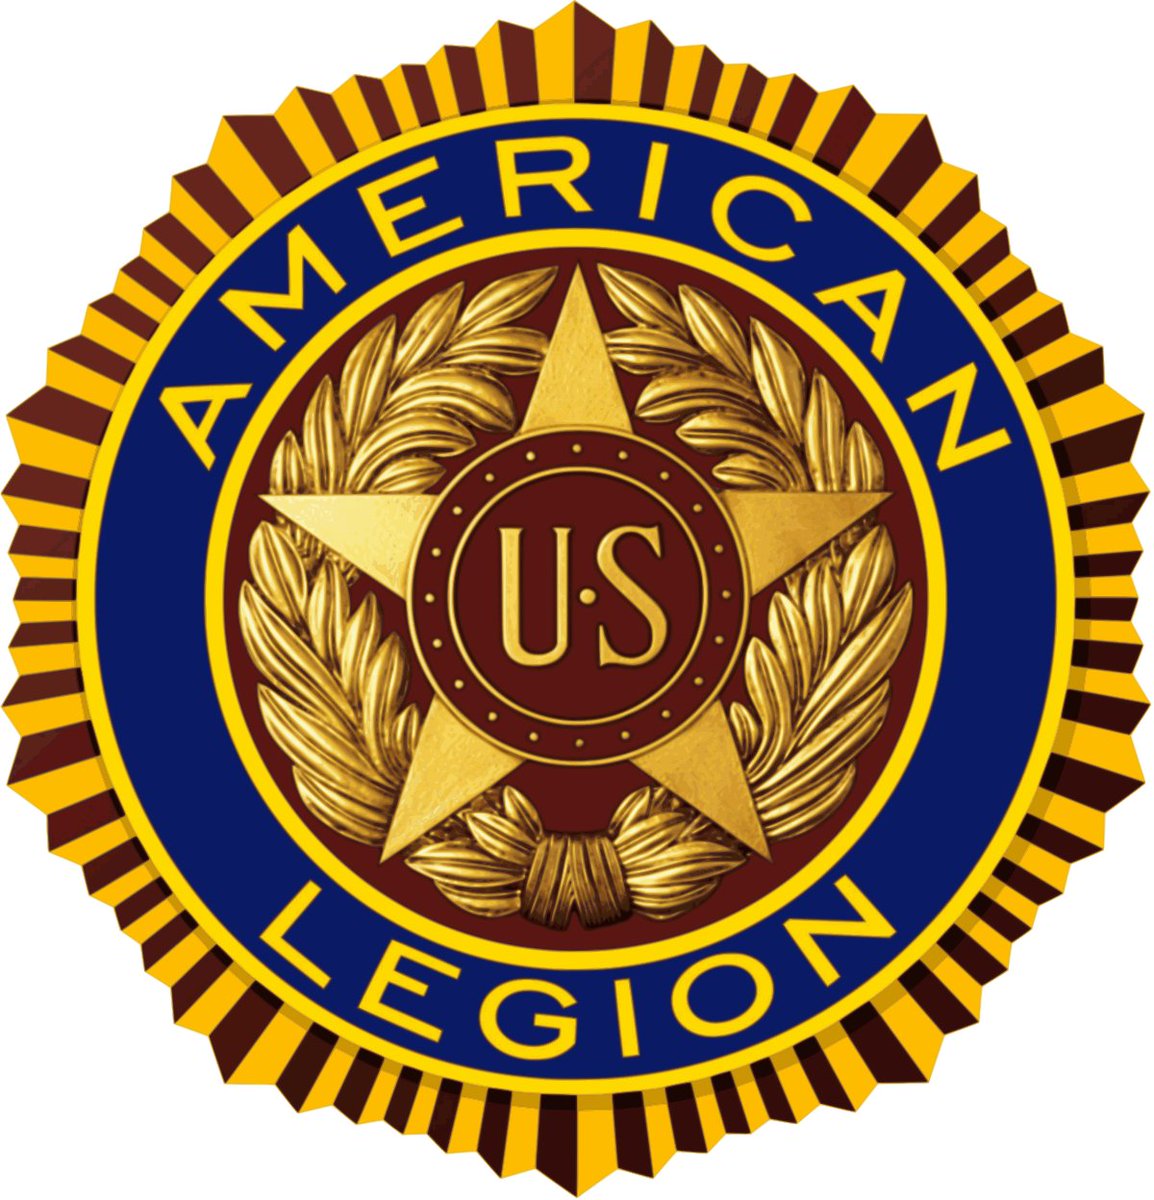 Today is the American Legion Birthday. The American Legion has served wartime veterans through promoting patriotism, military service, national security, and dedication to current service members and veterans alike. Learn more here: bit.ly/3bPdryO